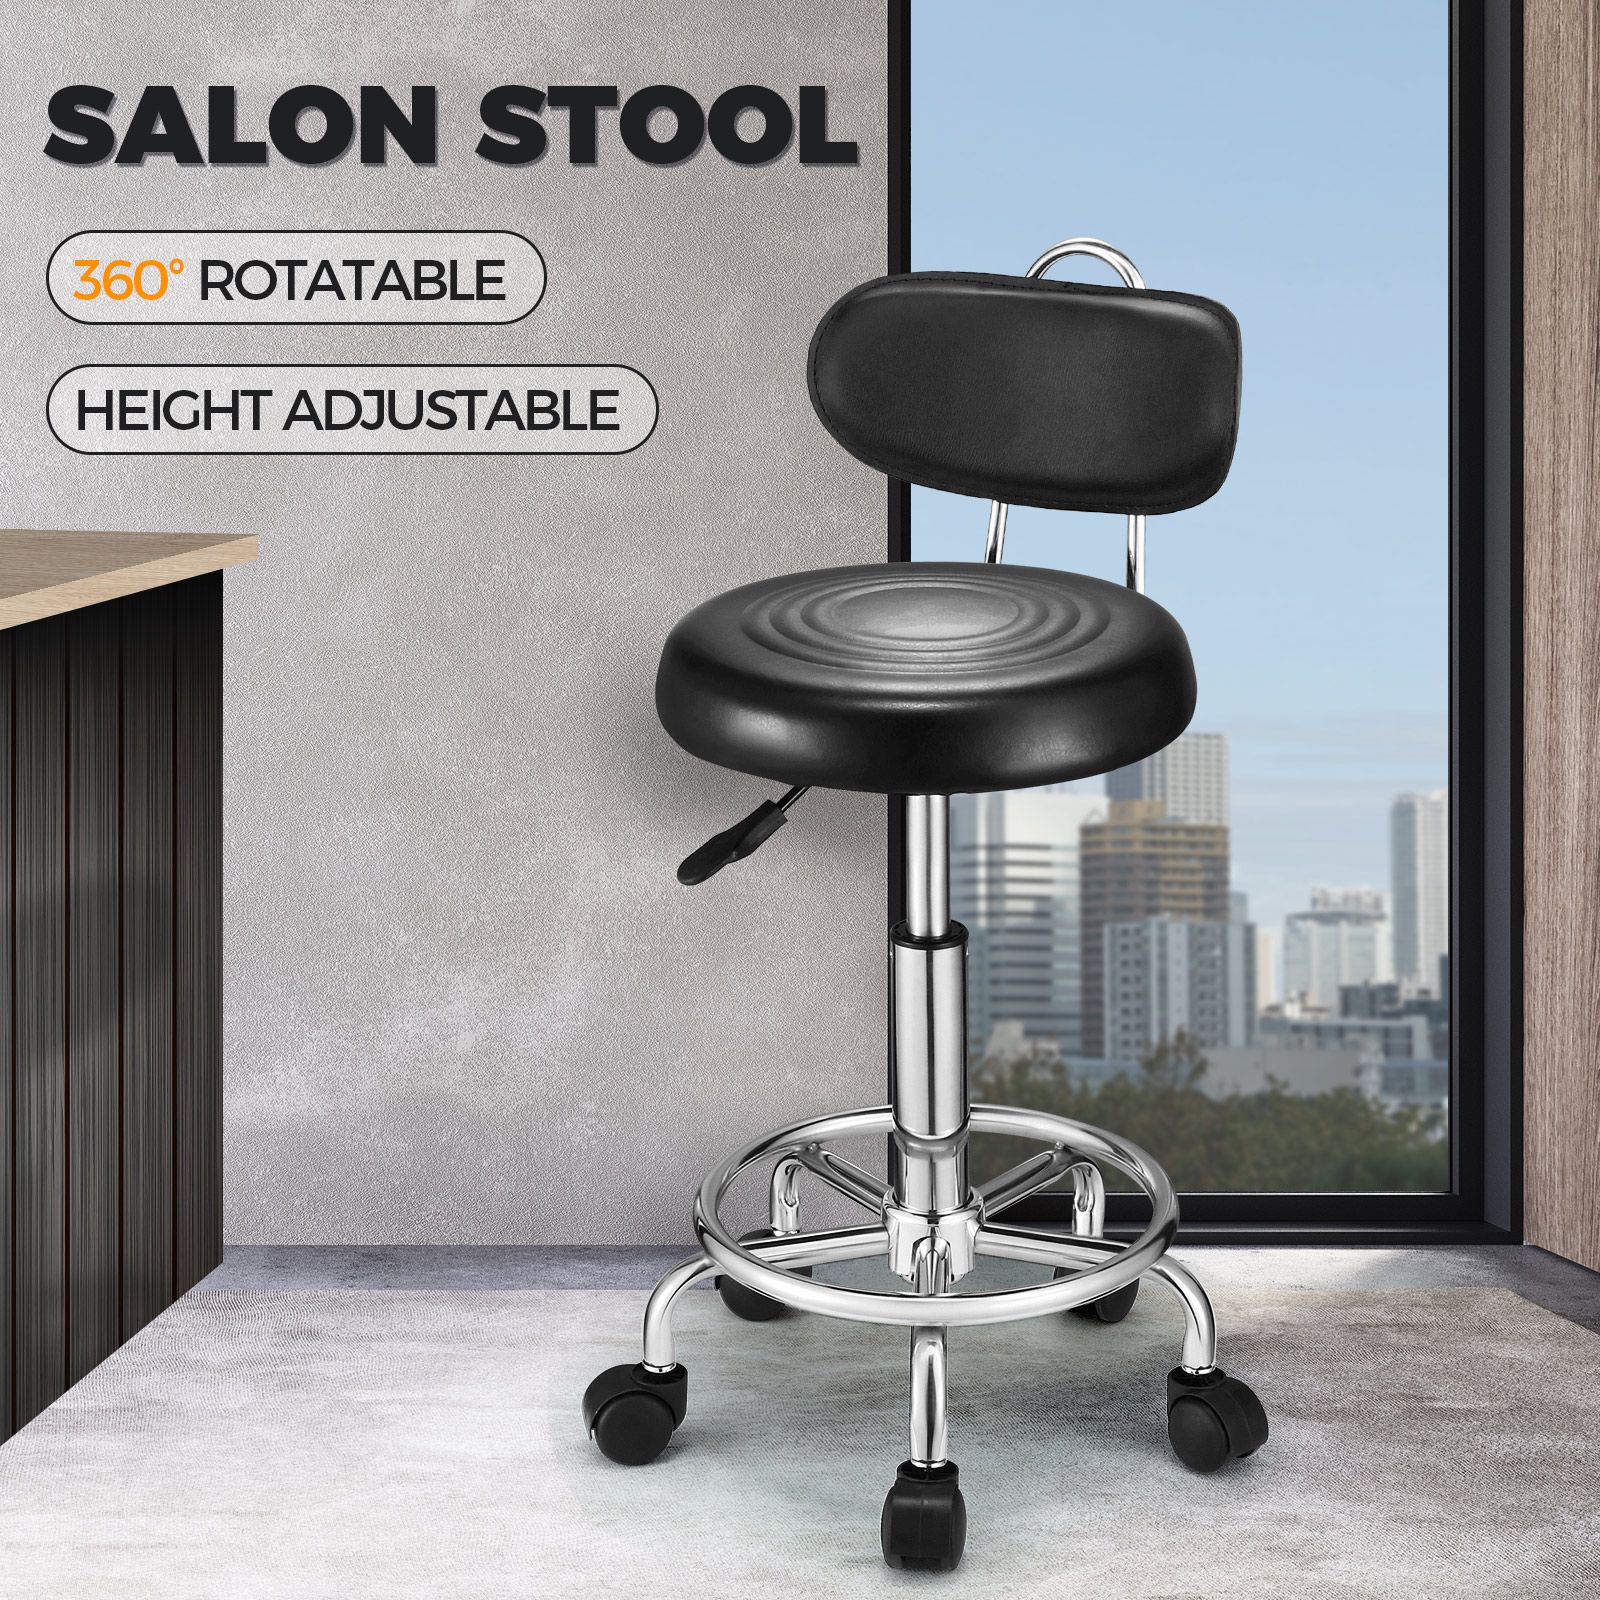 Barber Chair Salon Stool Beauty Clinic Hairdressing Rotatable Height Adjustable Round PU Black With Back